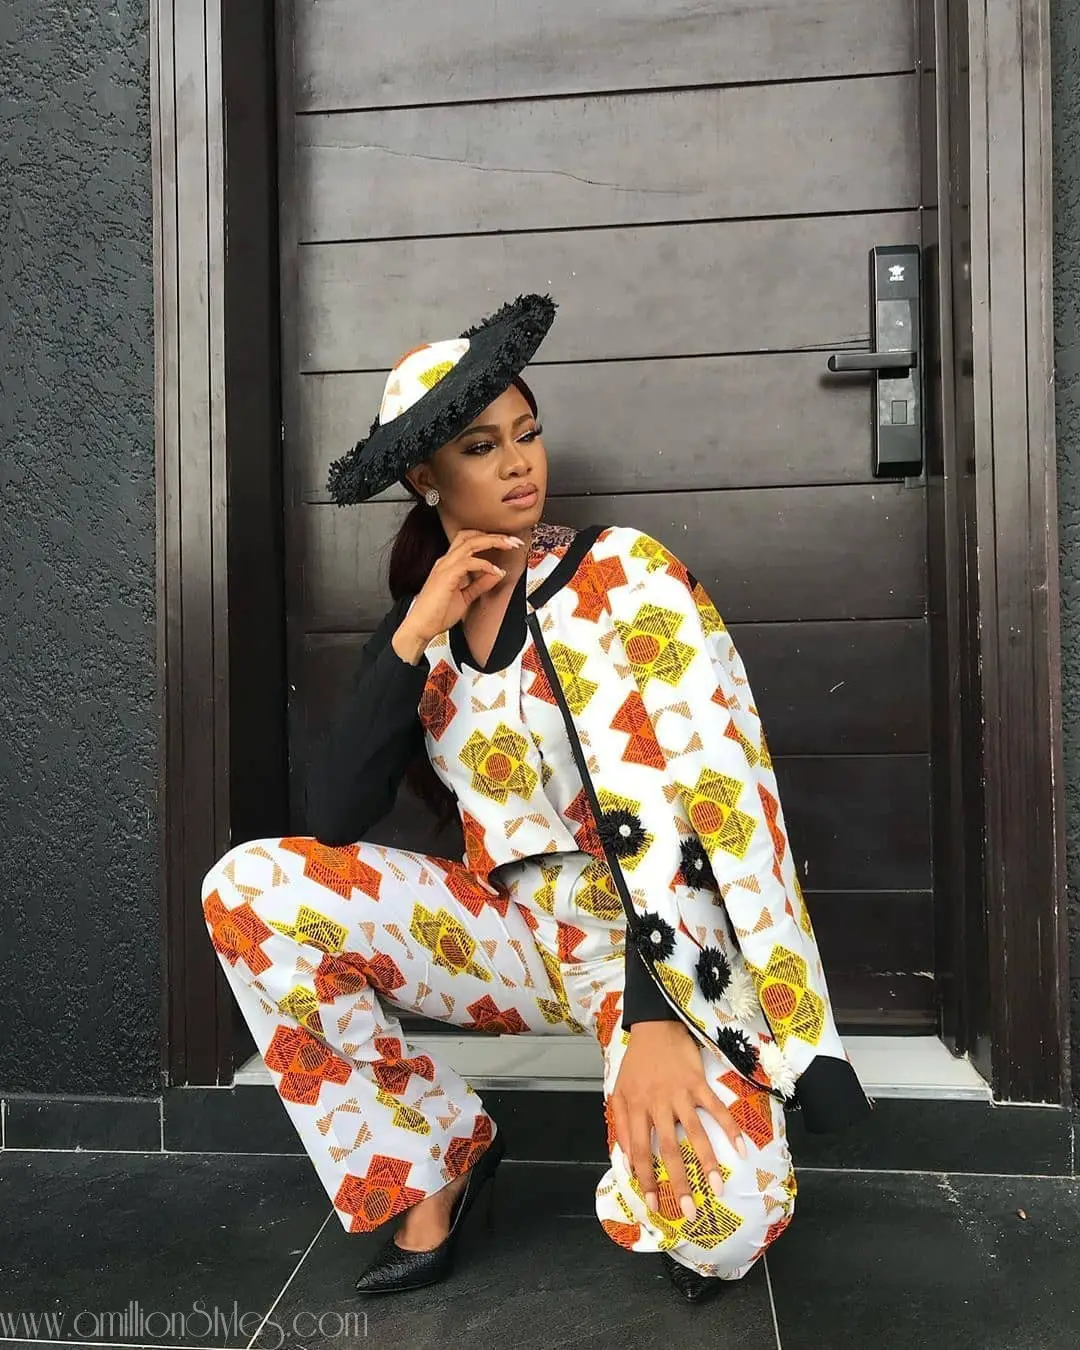 15 Latest Ankara Styles That Will Turn Your Heads